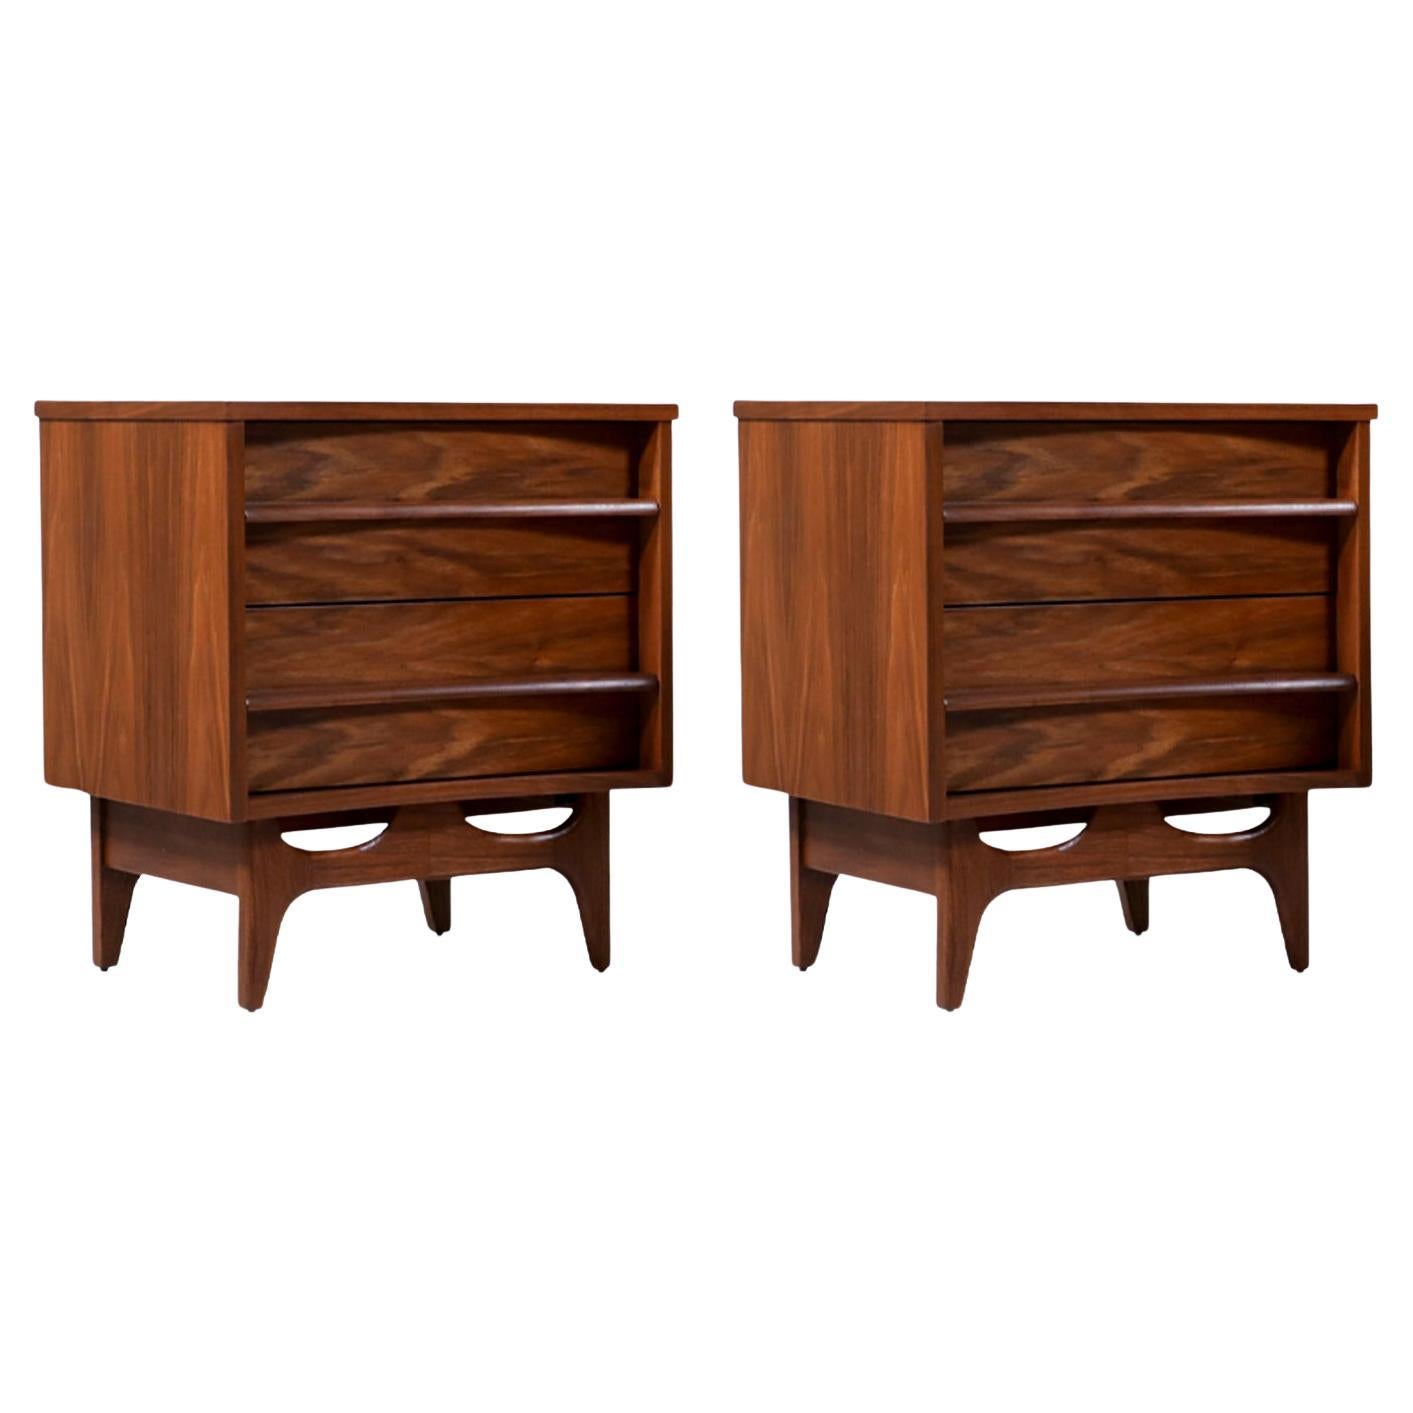 Mid-Century Modern Curved-Front Night Stands by Young Furniture Co.